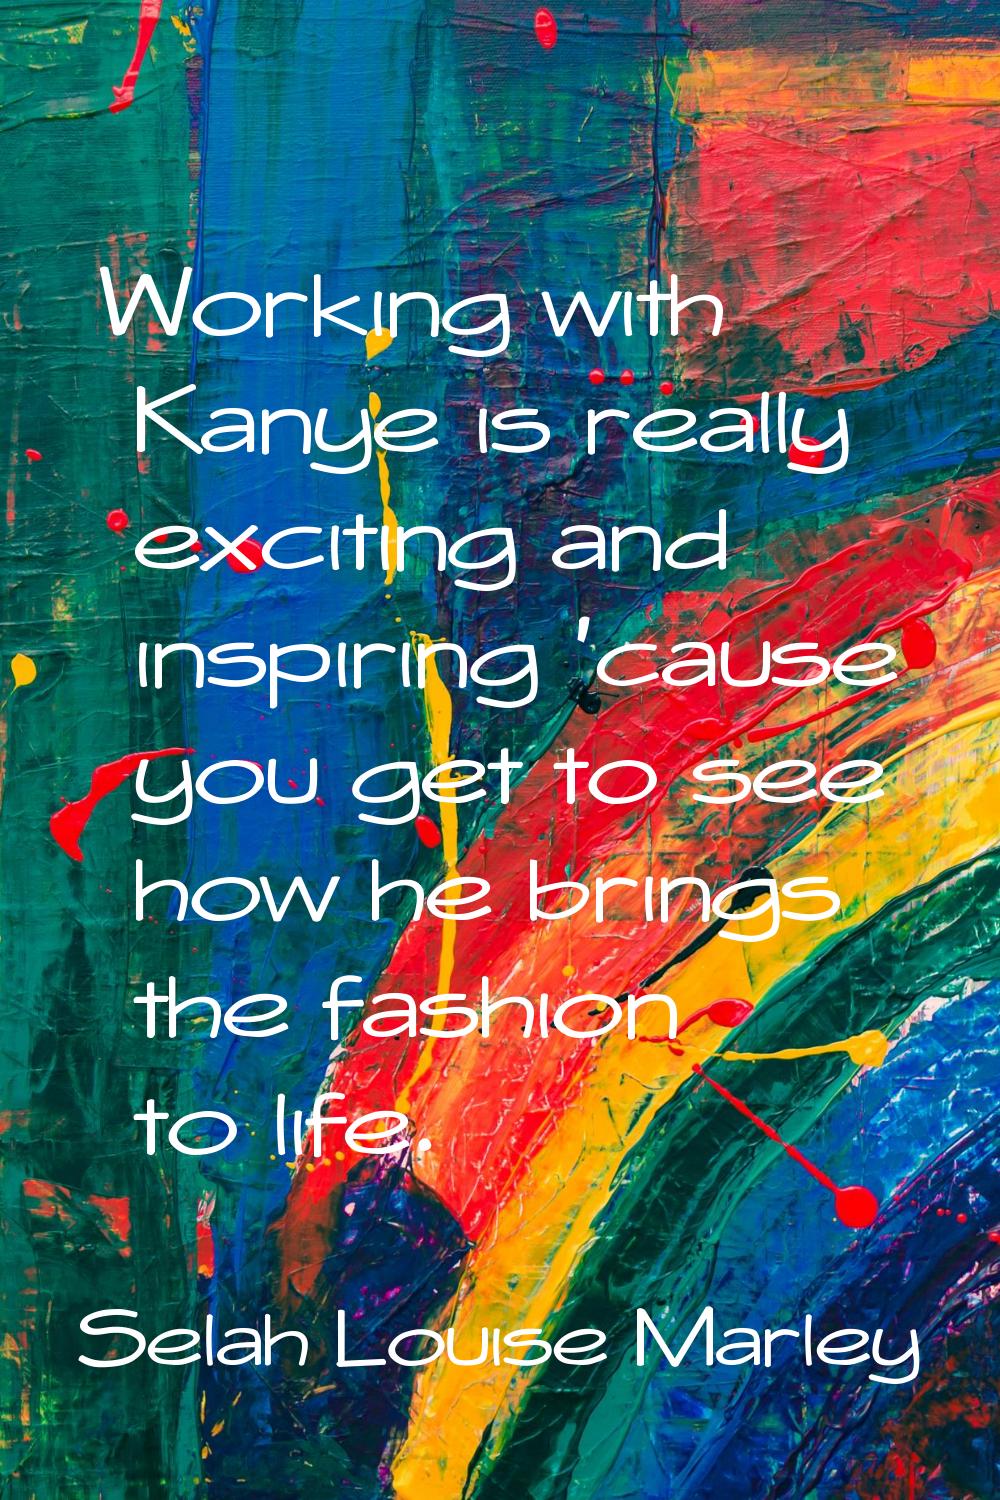 Working with Kanye is really exciting and inspiring 'cause you get to see how he brings the fashion